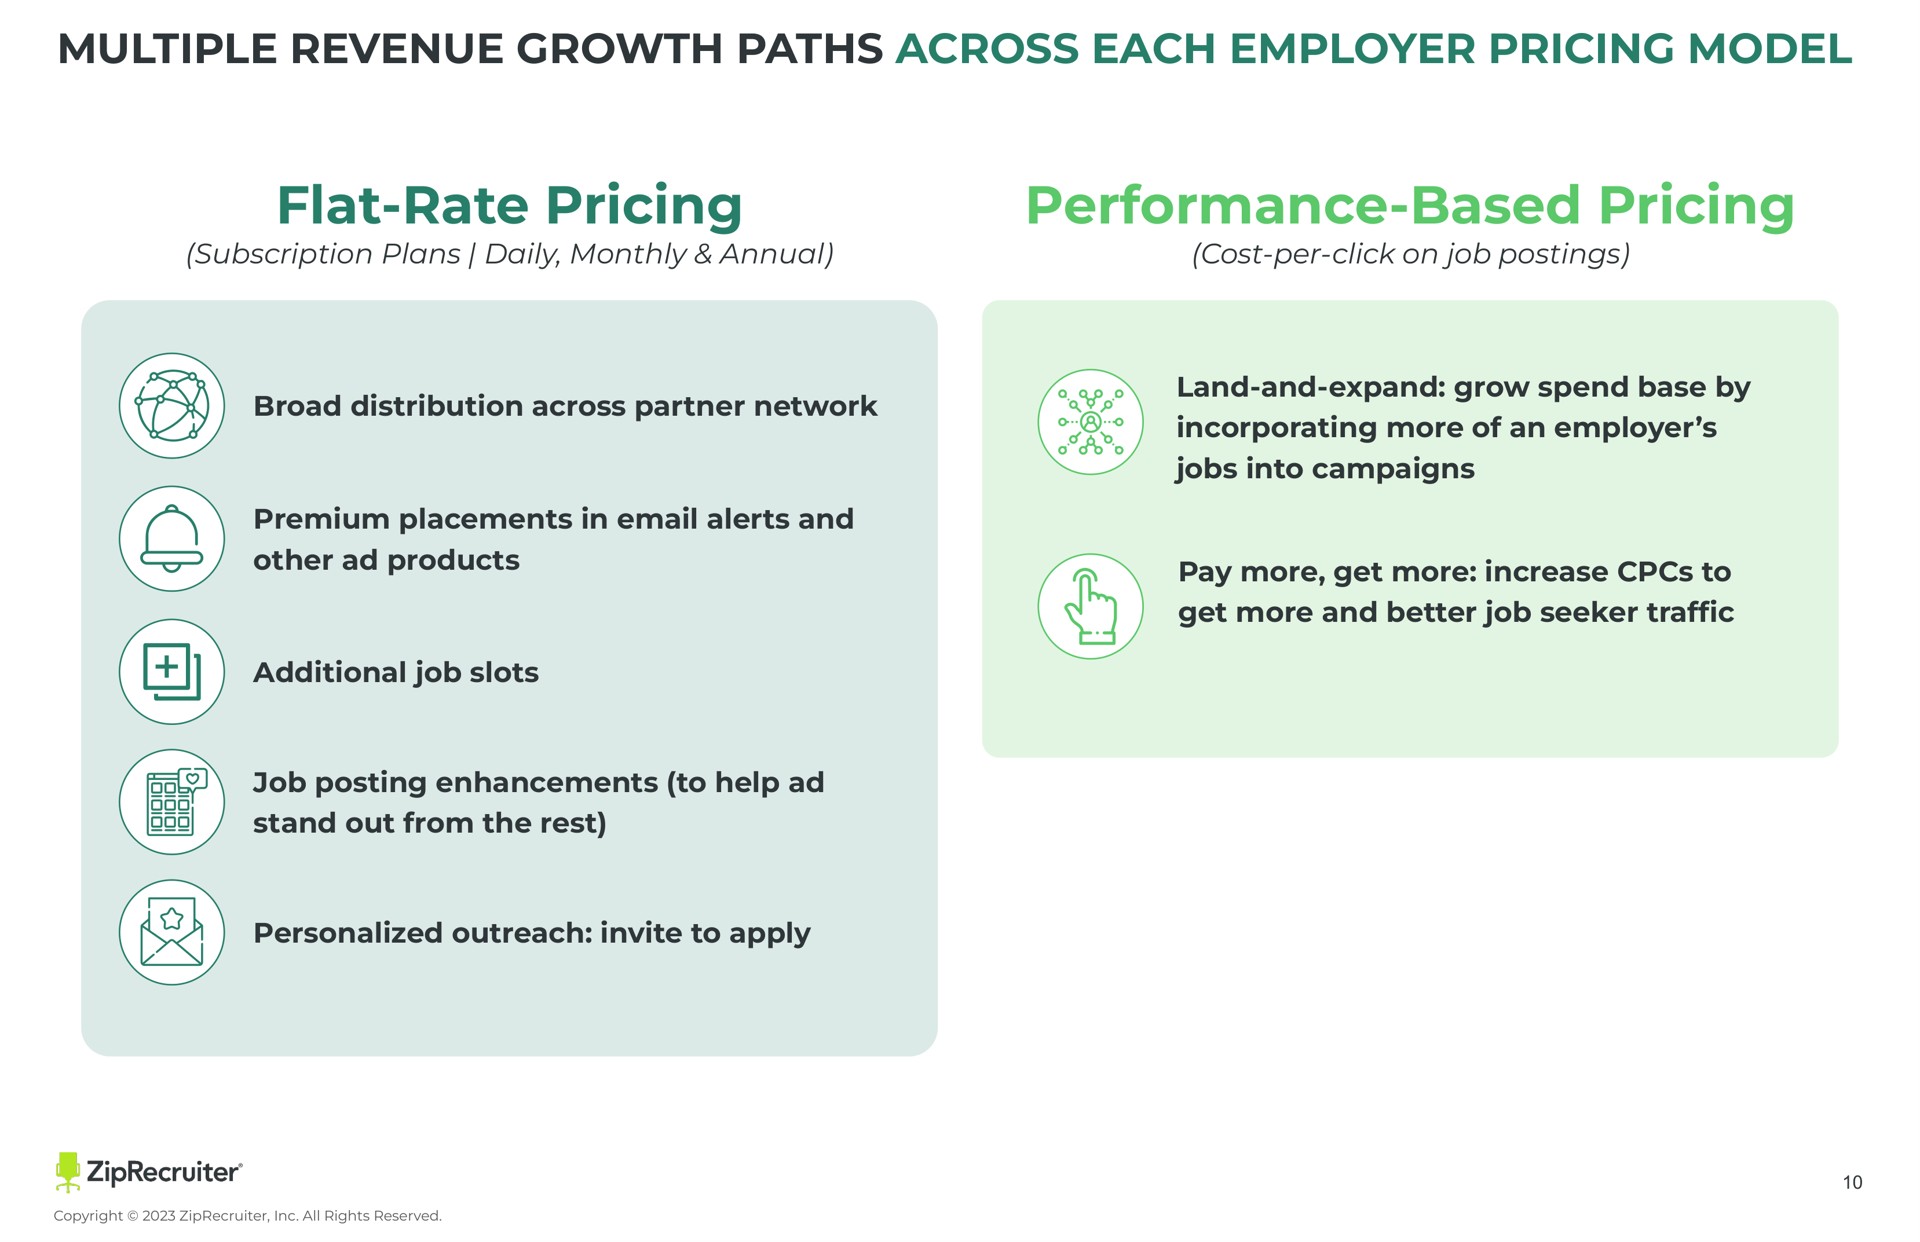 multiple revenue growth paths across each employer pricing model flat rate pricing subscription plans daily monthly annual performance based pricing cost per click on job postings land and expand grow spend base by incorporating more of an employer jobs into campaigns pay more get more increase to get more and better job seeker broad distribution across partner network premium placements in alerts and other products additional job slots job posting enhancements to help stand out from the rest personalized outreach invite to apply | ZipRecruiter